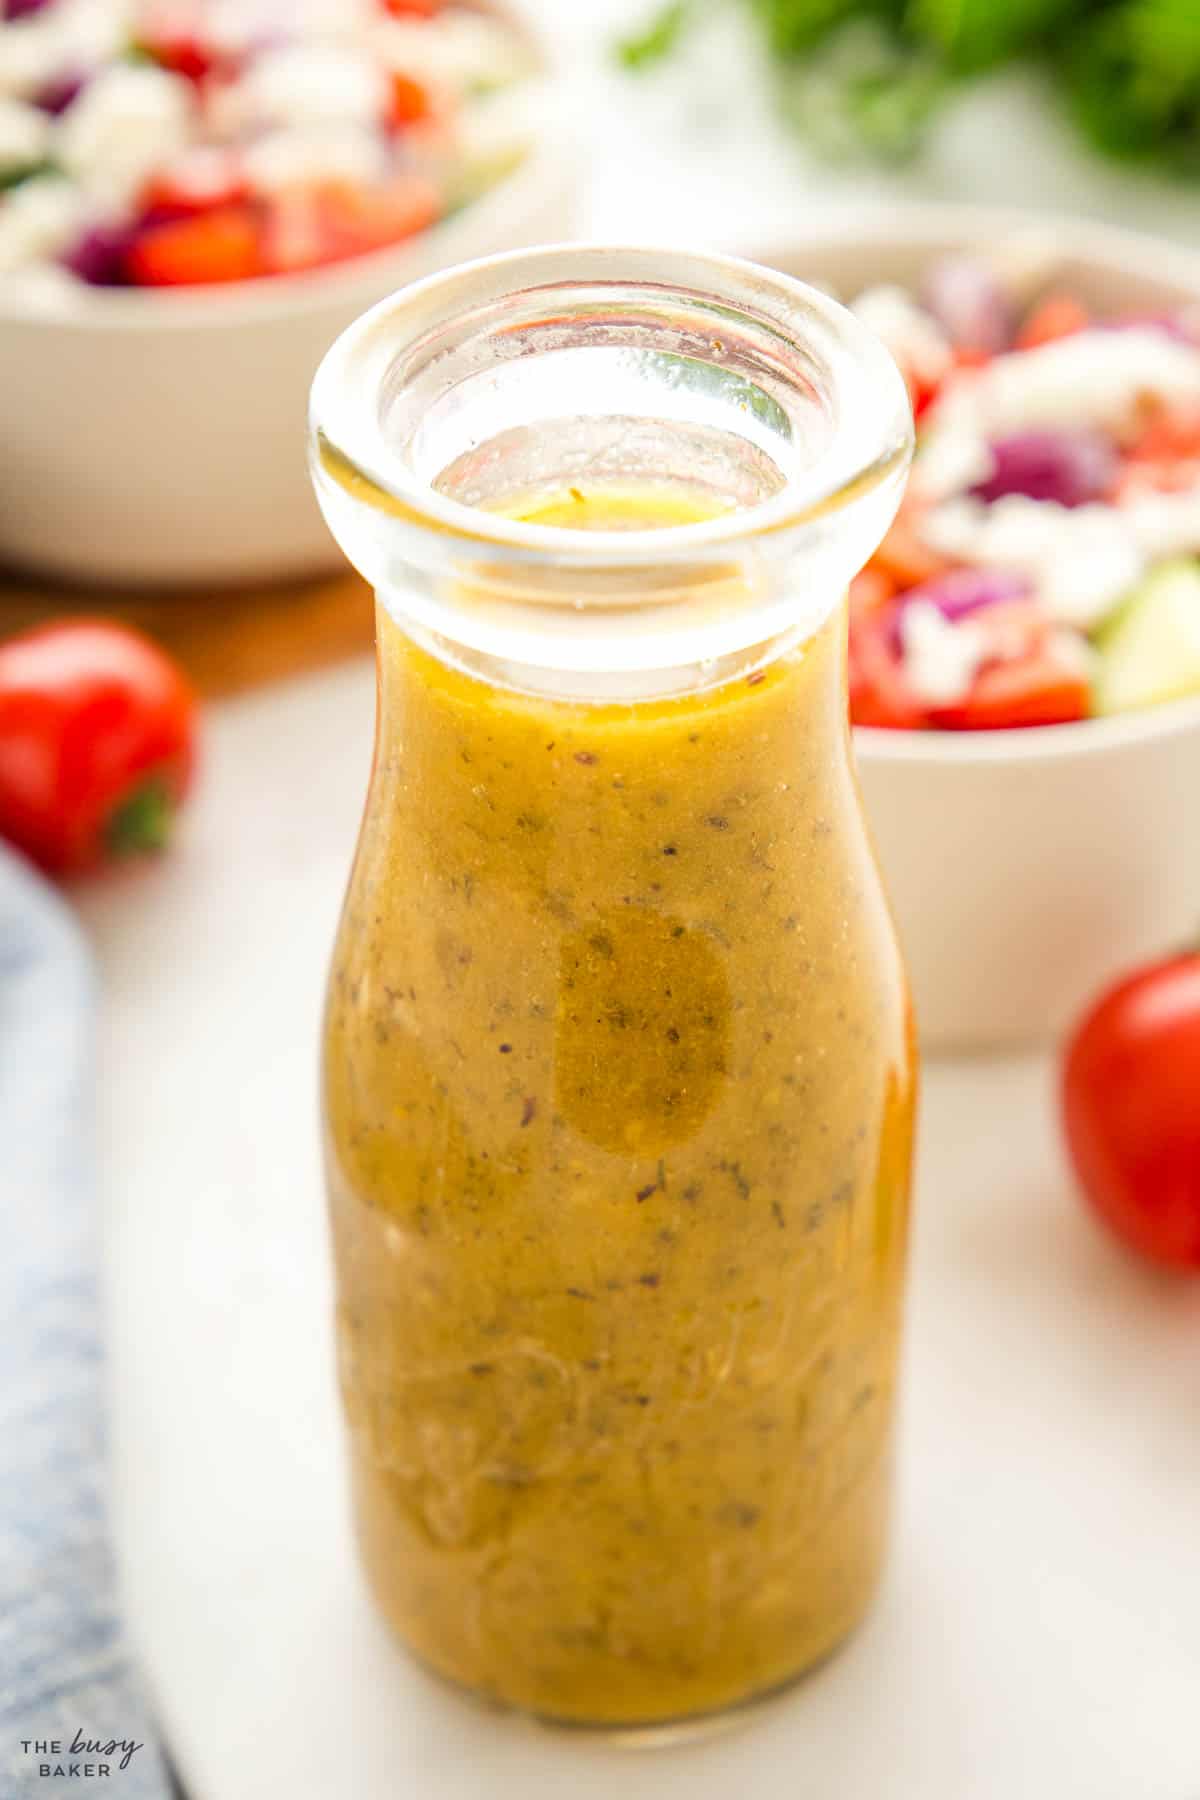 Vinaigrette in a glass container